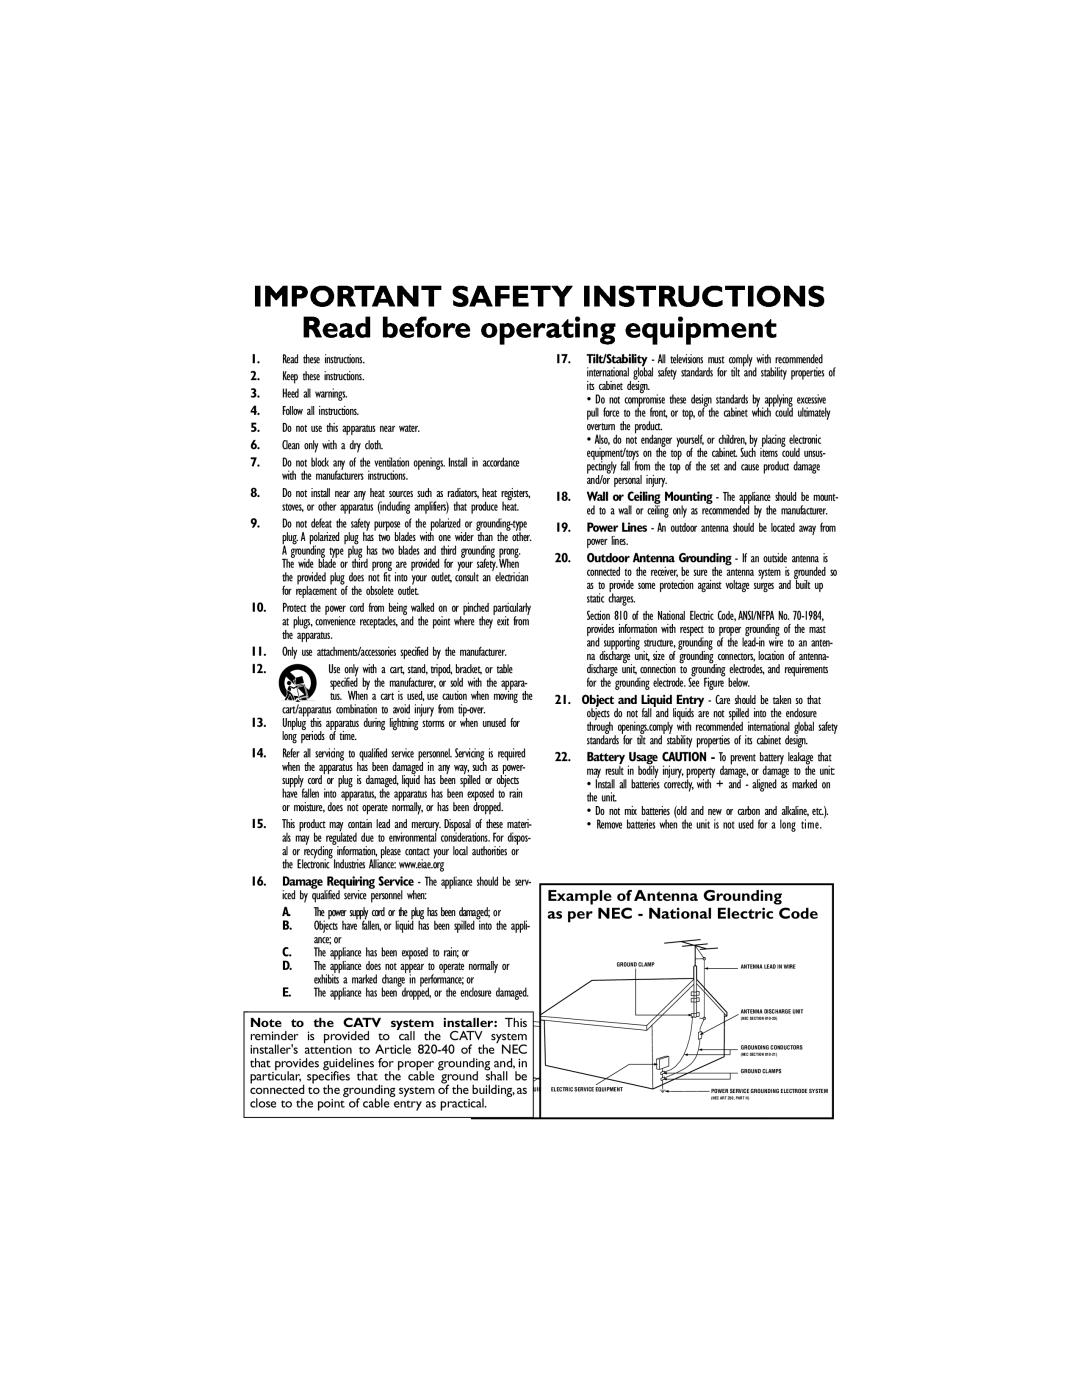 Magnavox 32MT3305/17 IMPORTANT SAFETY INSTRUCTIONS Read before operating equipment, Example of Antenna Grounding, ance or 